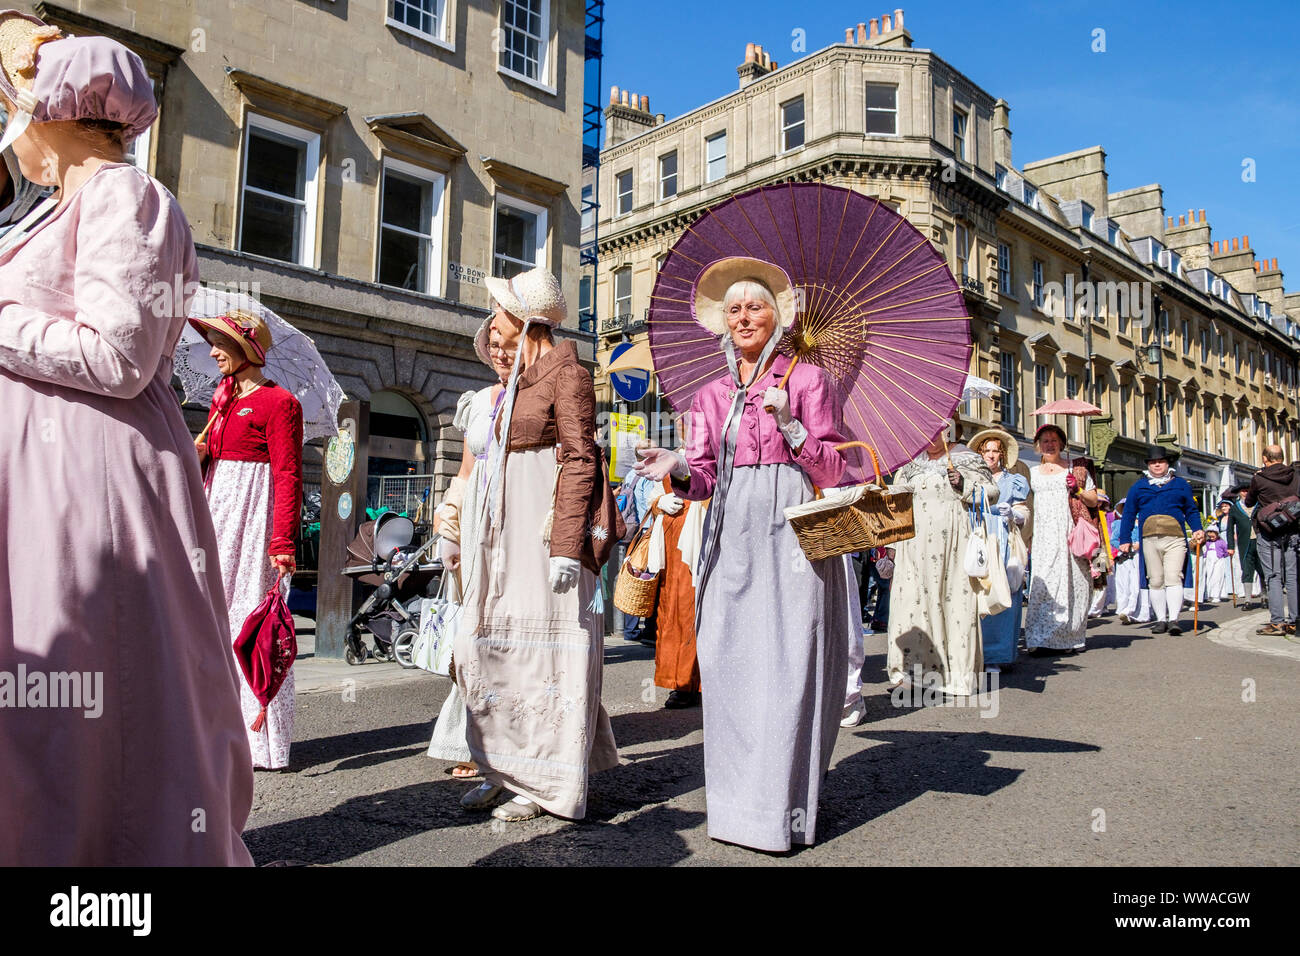 Bath, Somerset, UK. 14th Sep, 2019. Jane Austen fans are pictured taking part in the world famous Grand Regency Costumed Promenade. The Promenade, part of the 10 day Jane Austen Festival is a procession through the streets of Bath and the participants who come from all over the world dress in 18th Century costume. Credit: lynchpics/Alamy Live News Stock Photo